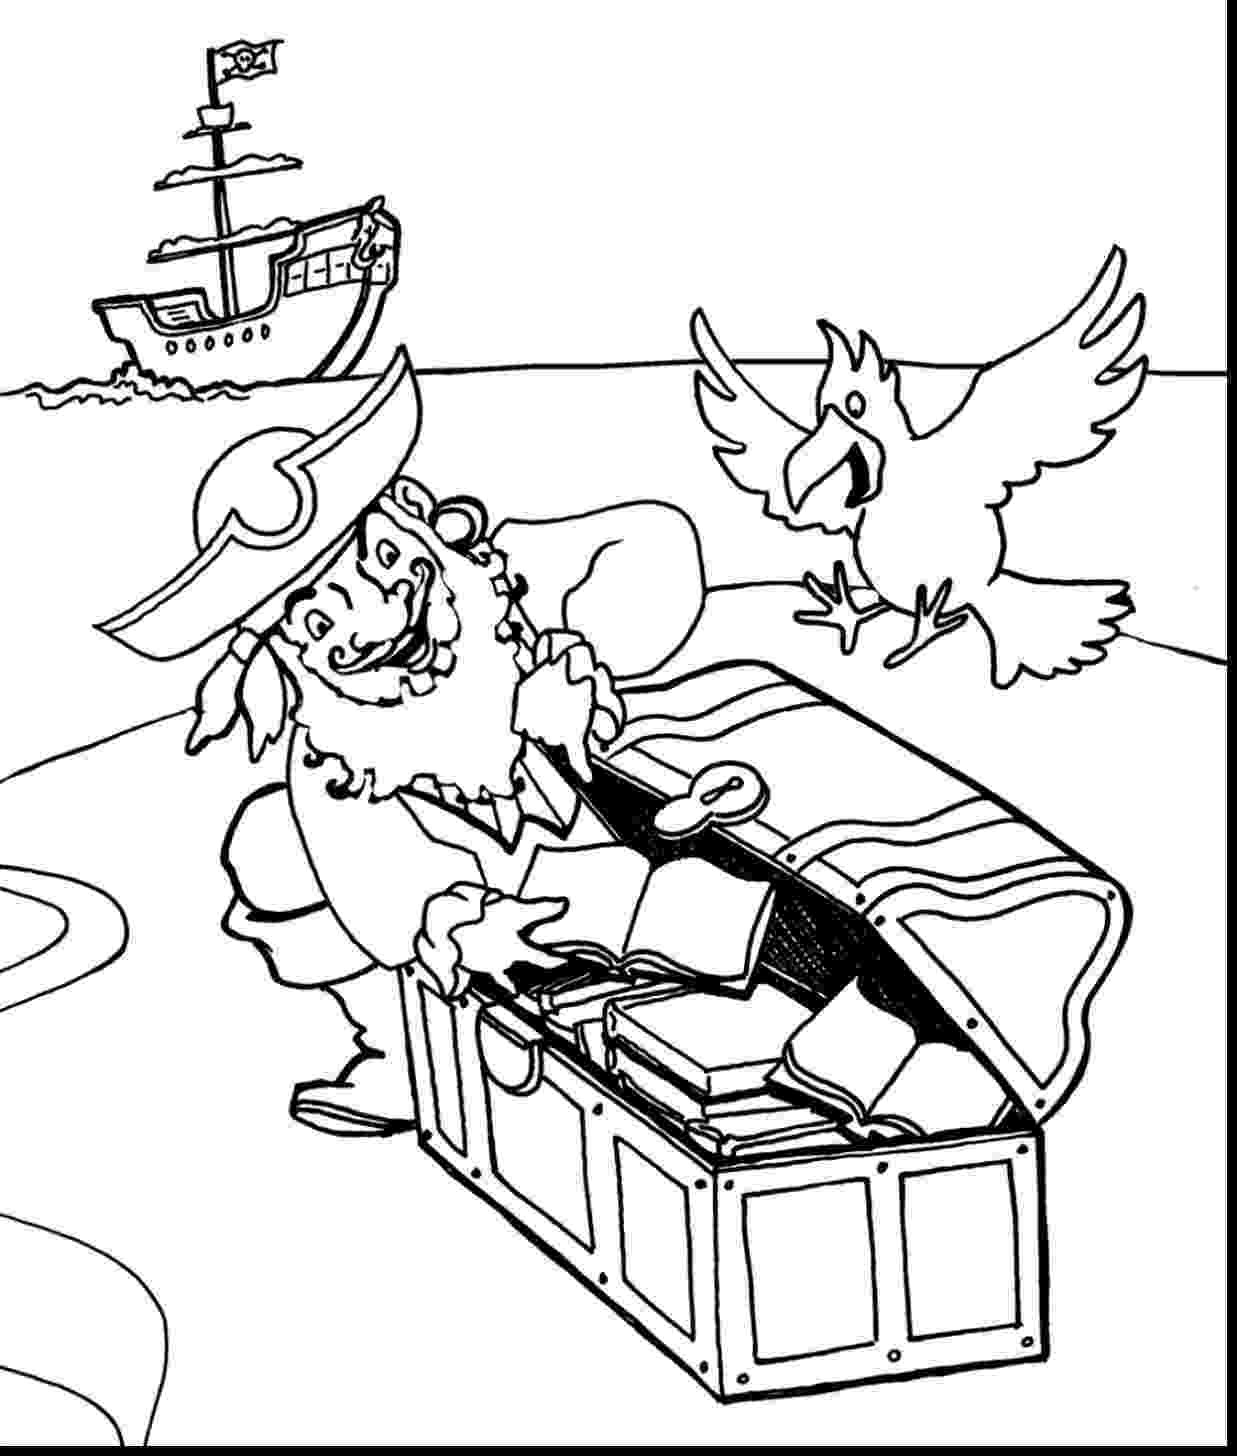 pittsburgh pirates coloring pages pittsburgh pirates coloring pages coloring home pages coloring pirates pittsburgh 